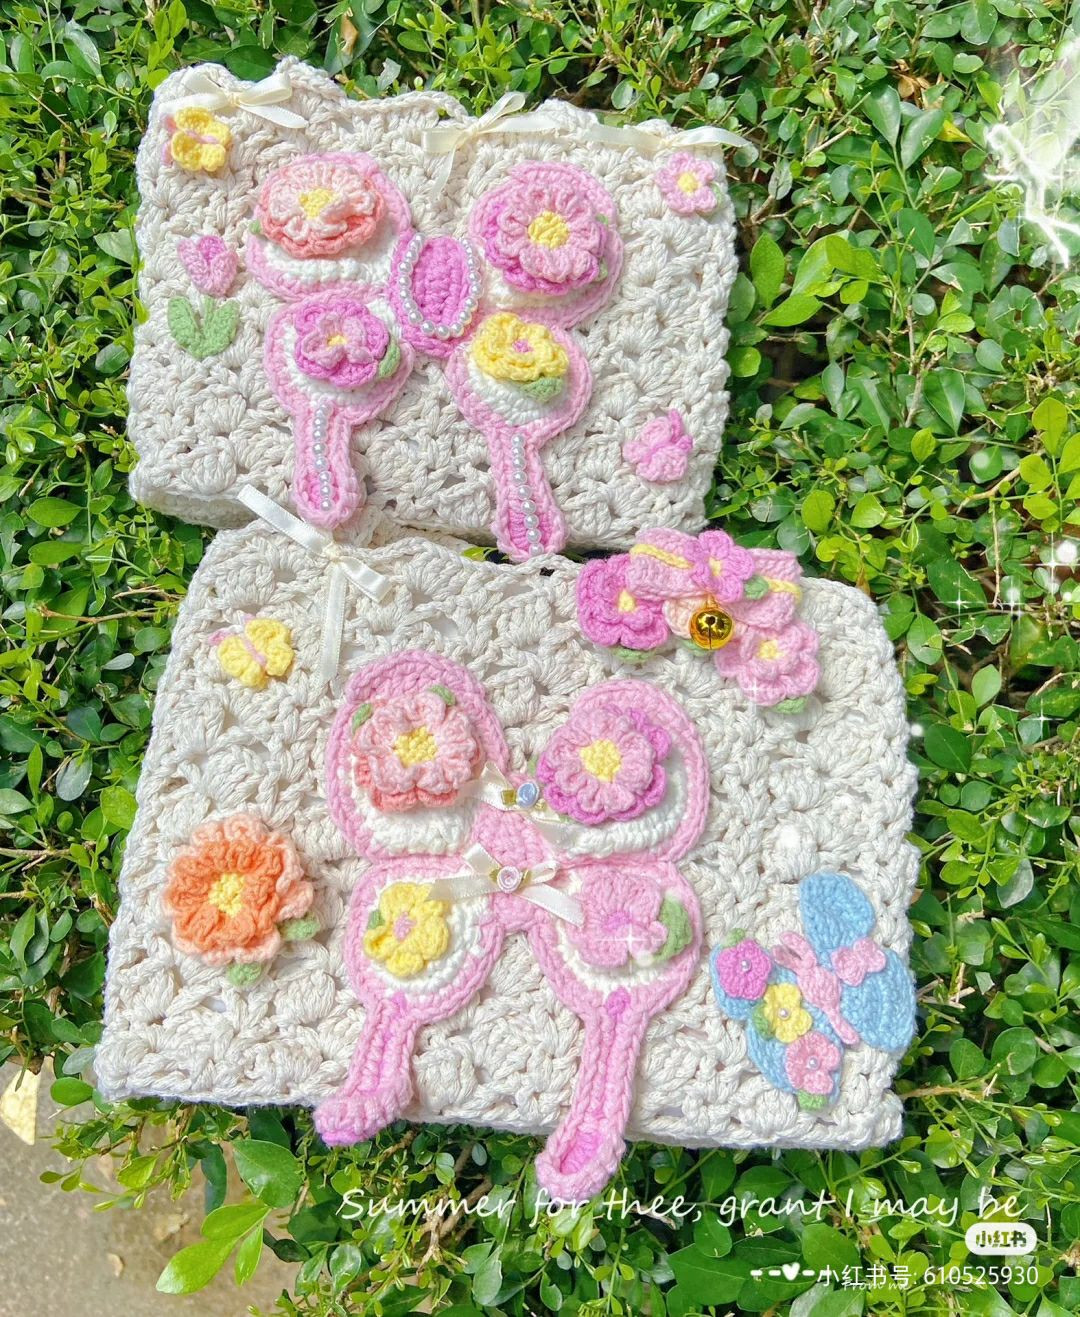 Crochet pattern for blue, white and yellow floral handbag